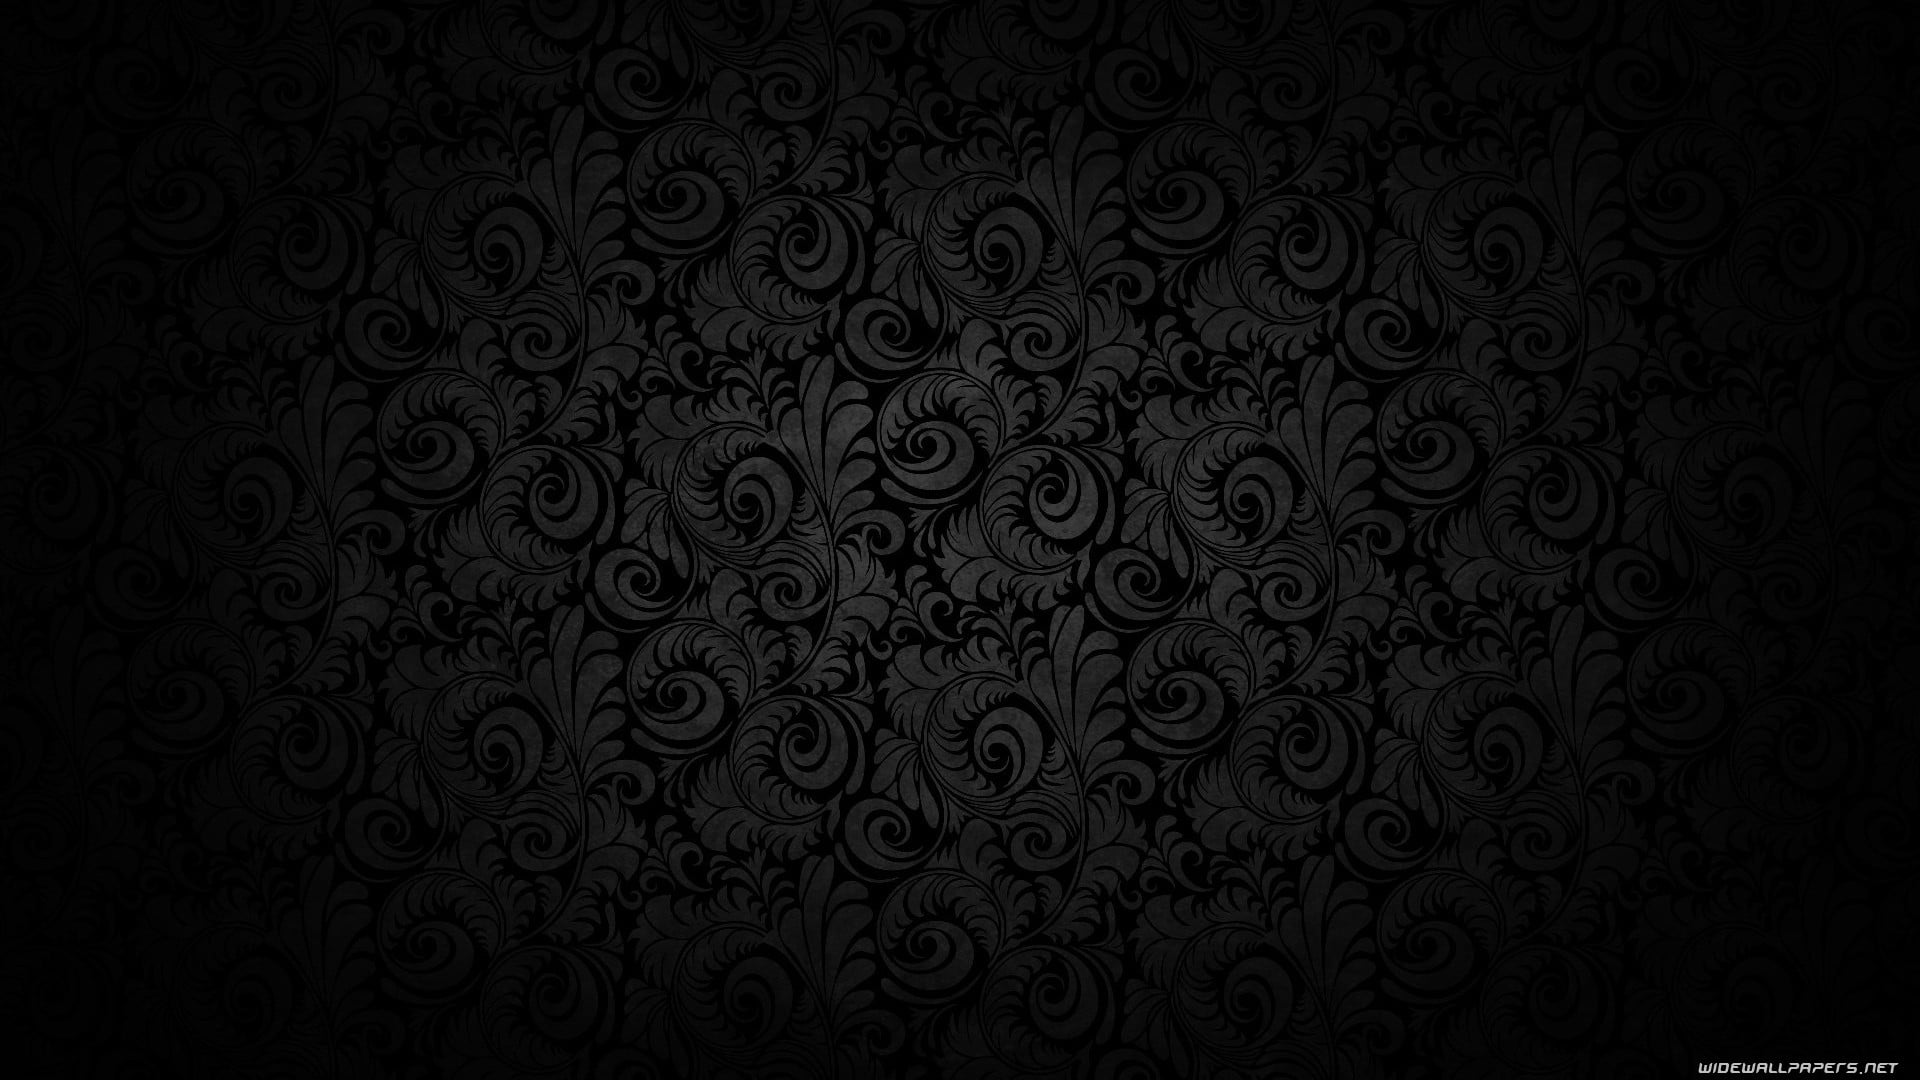 gray and black floral background illustration, pattern, monochrome